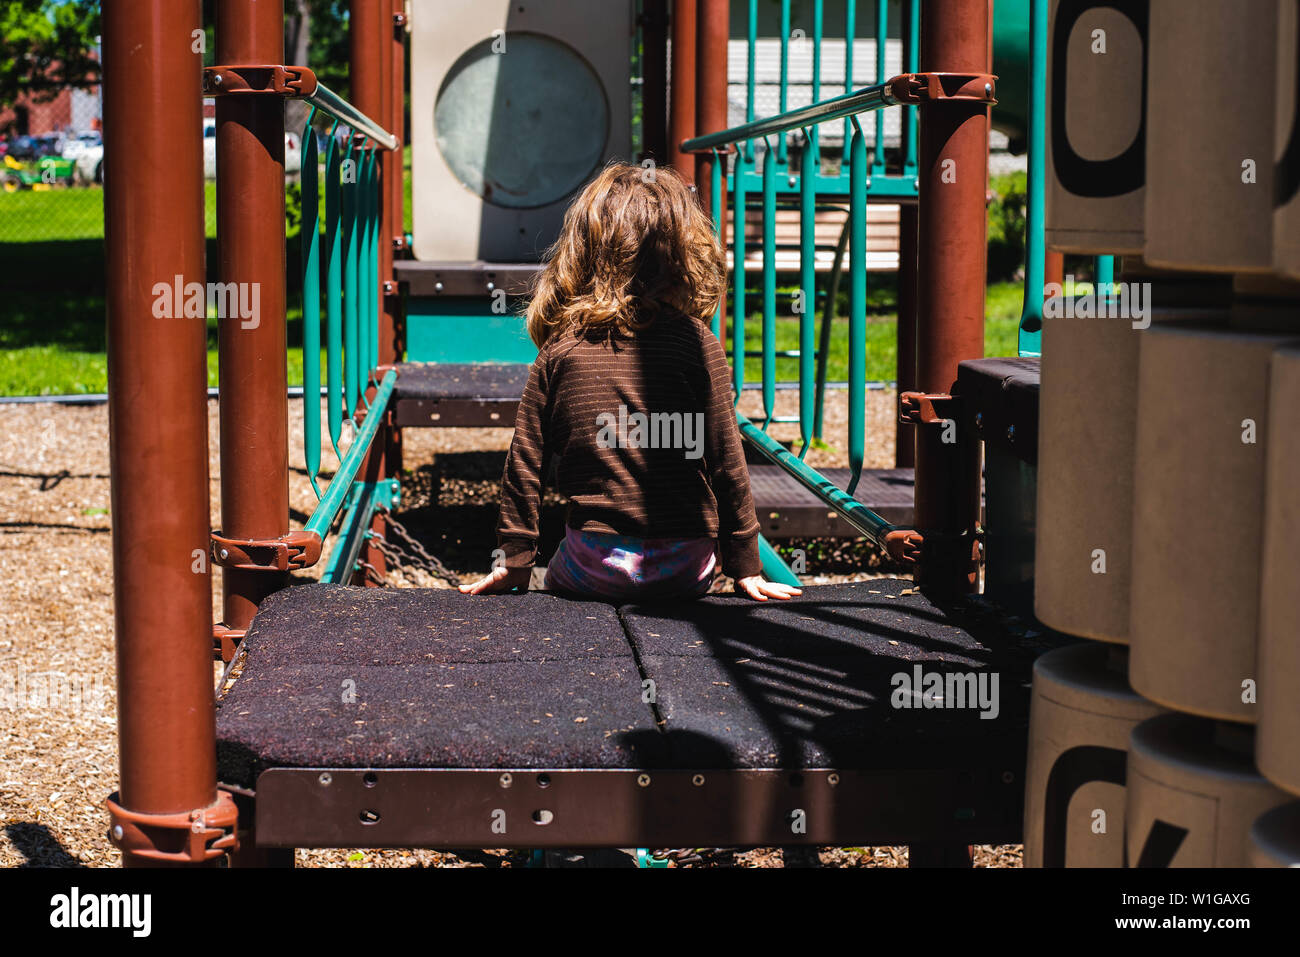 A young girl sits on playground equipment on a warm summer day. Stock Photo